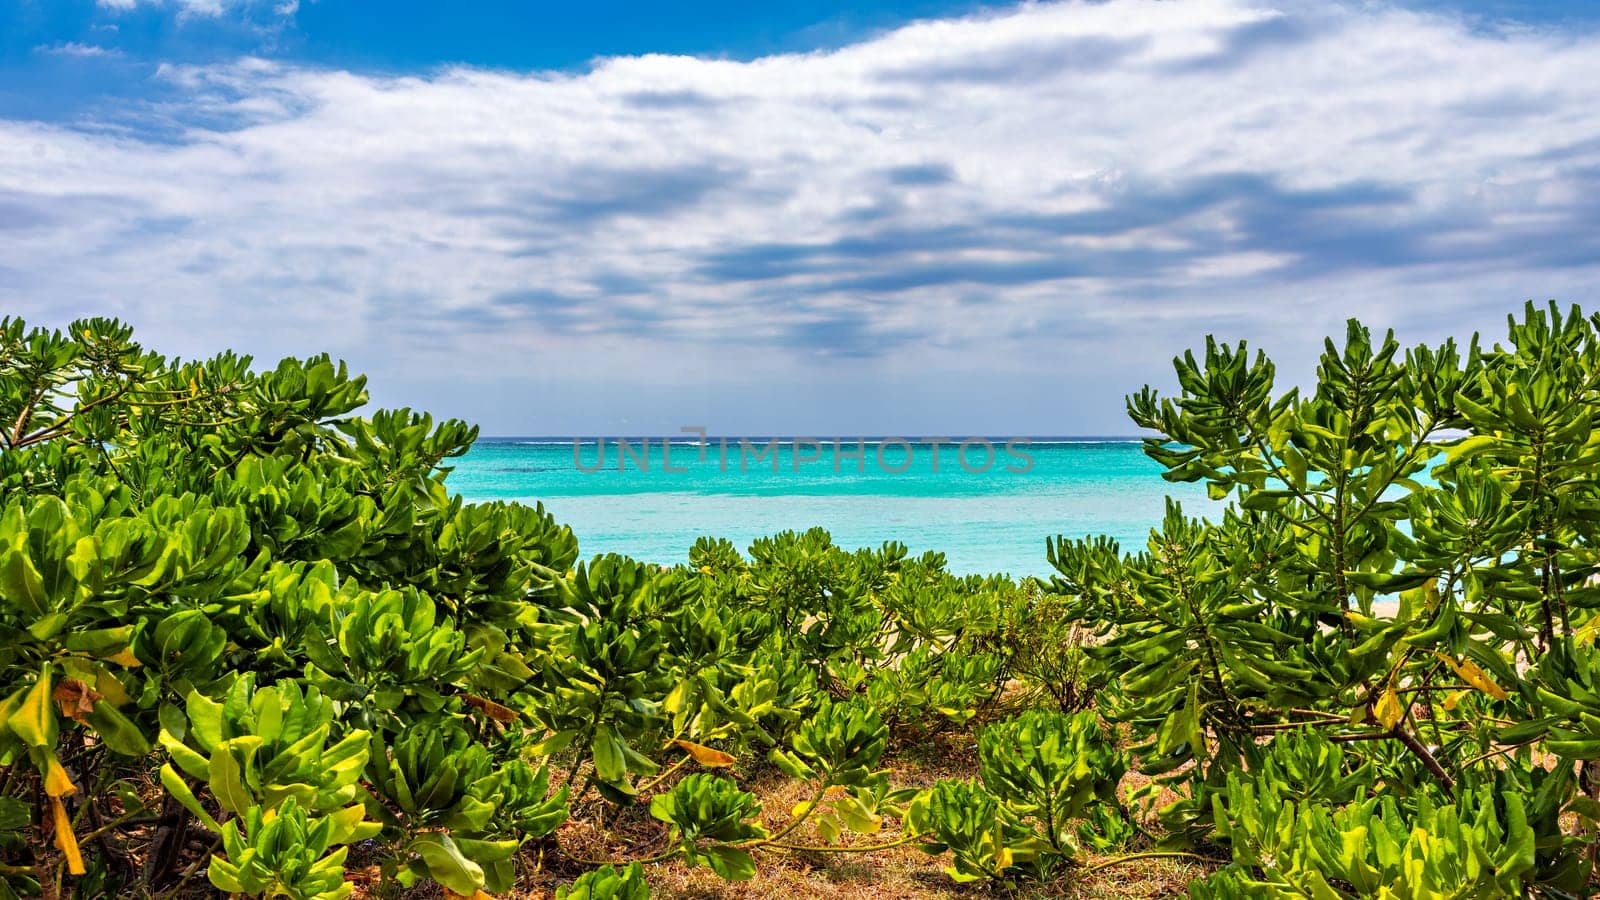 Tropical beach with green lush vegetation against a blue cloudy sky and turquoise water in sea, Mauritius, Africa. 